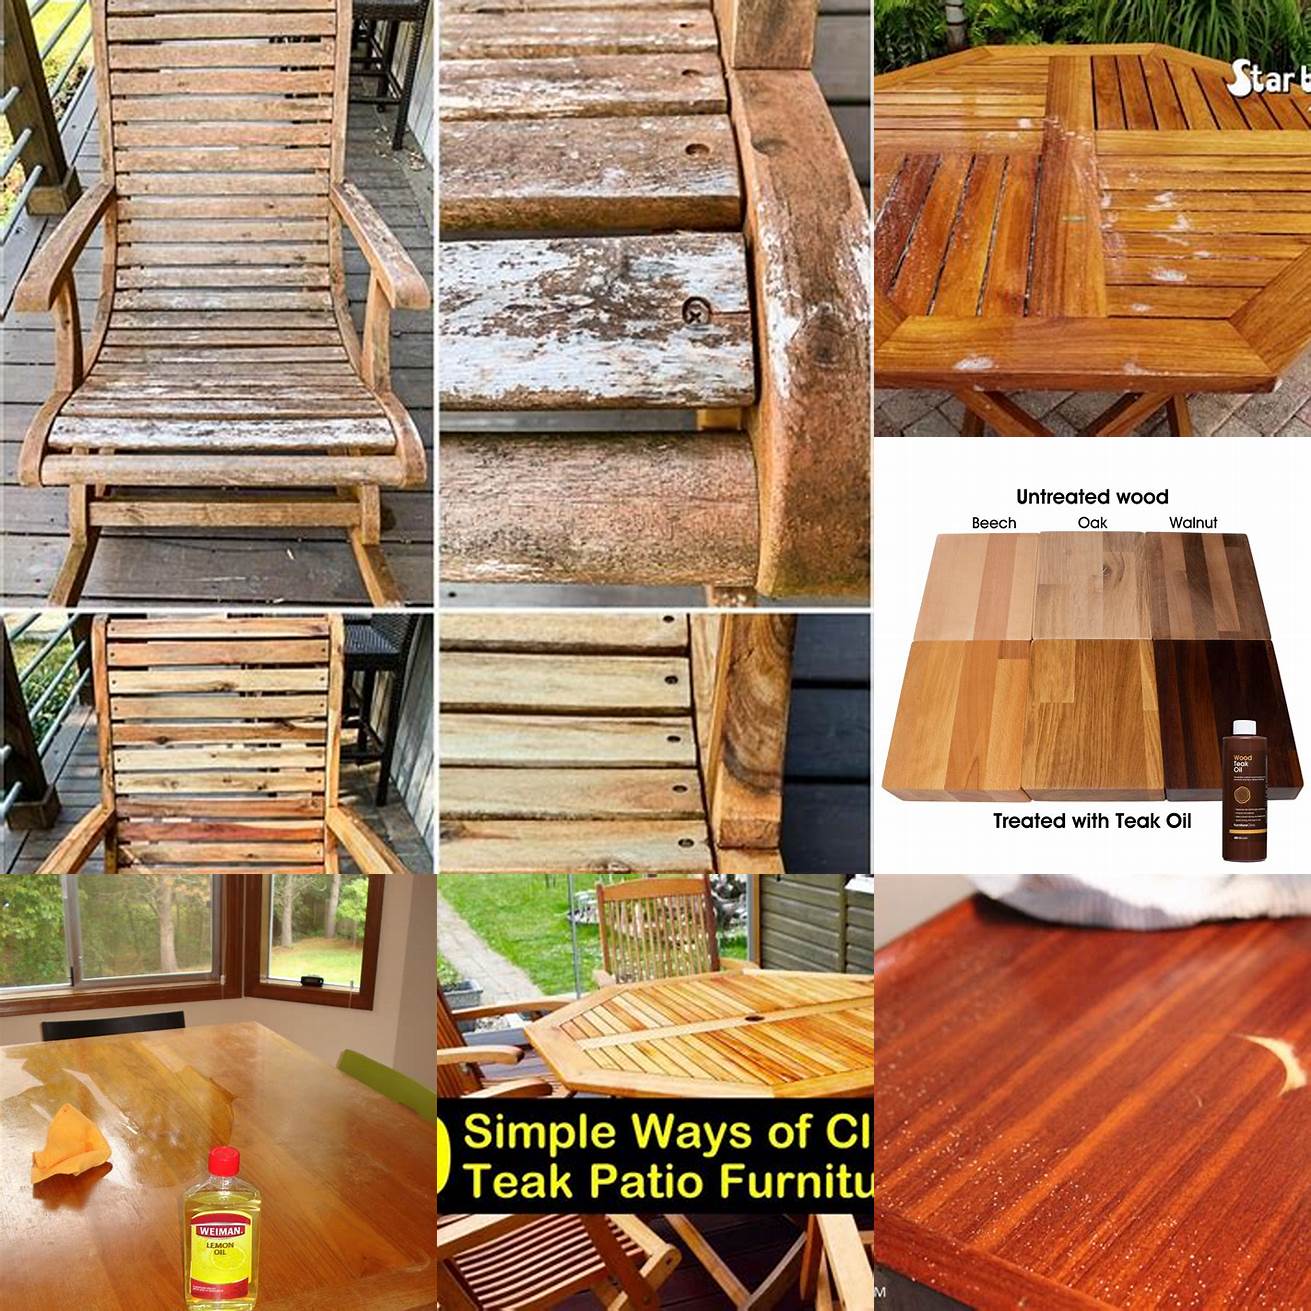 A Picture Of Teak Furniture After Oiling